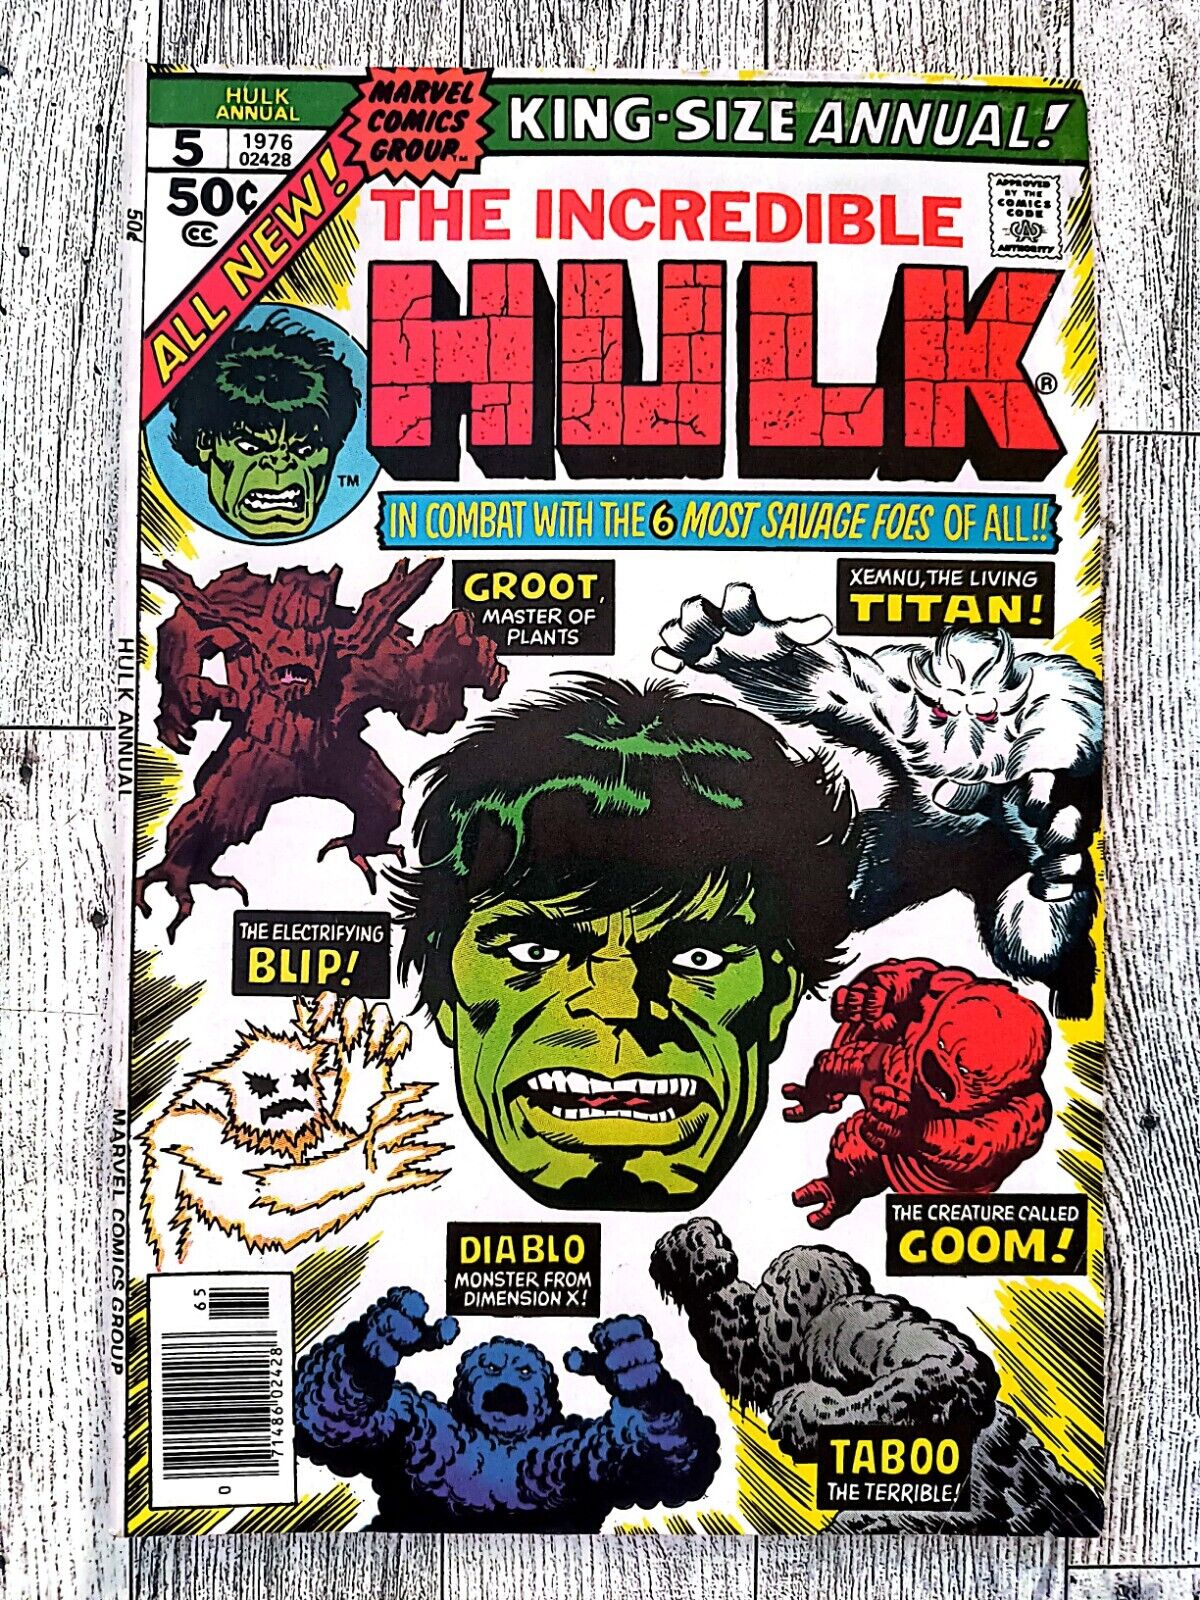 Incredible Hulk King-Size Annual 5 👉 CGC Ready💥2nd Appearance Groot Near mint 